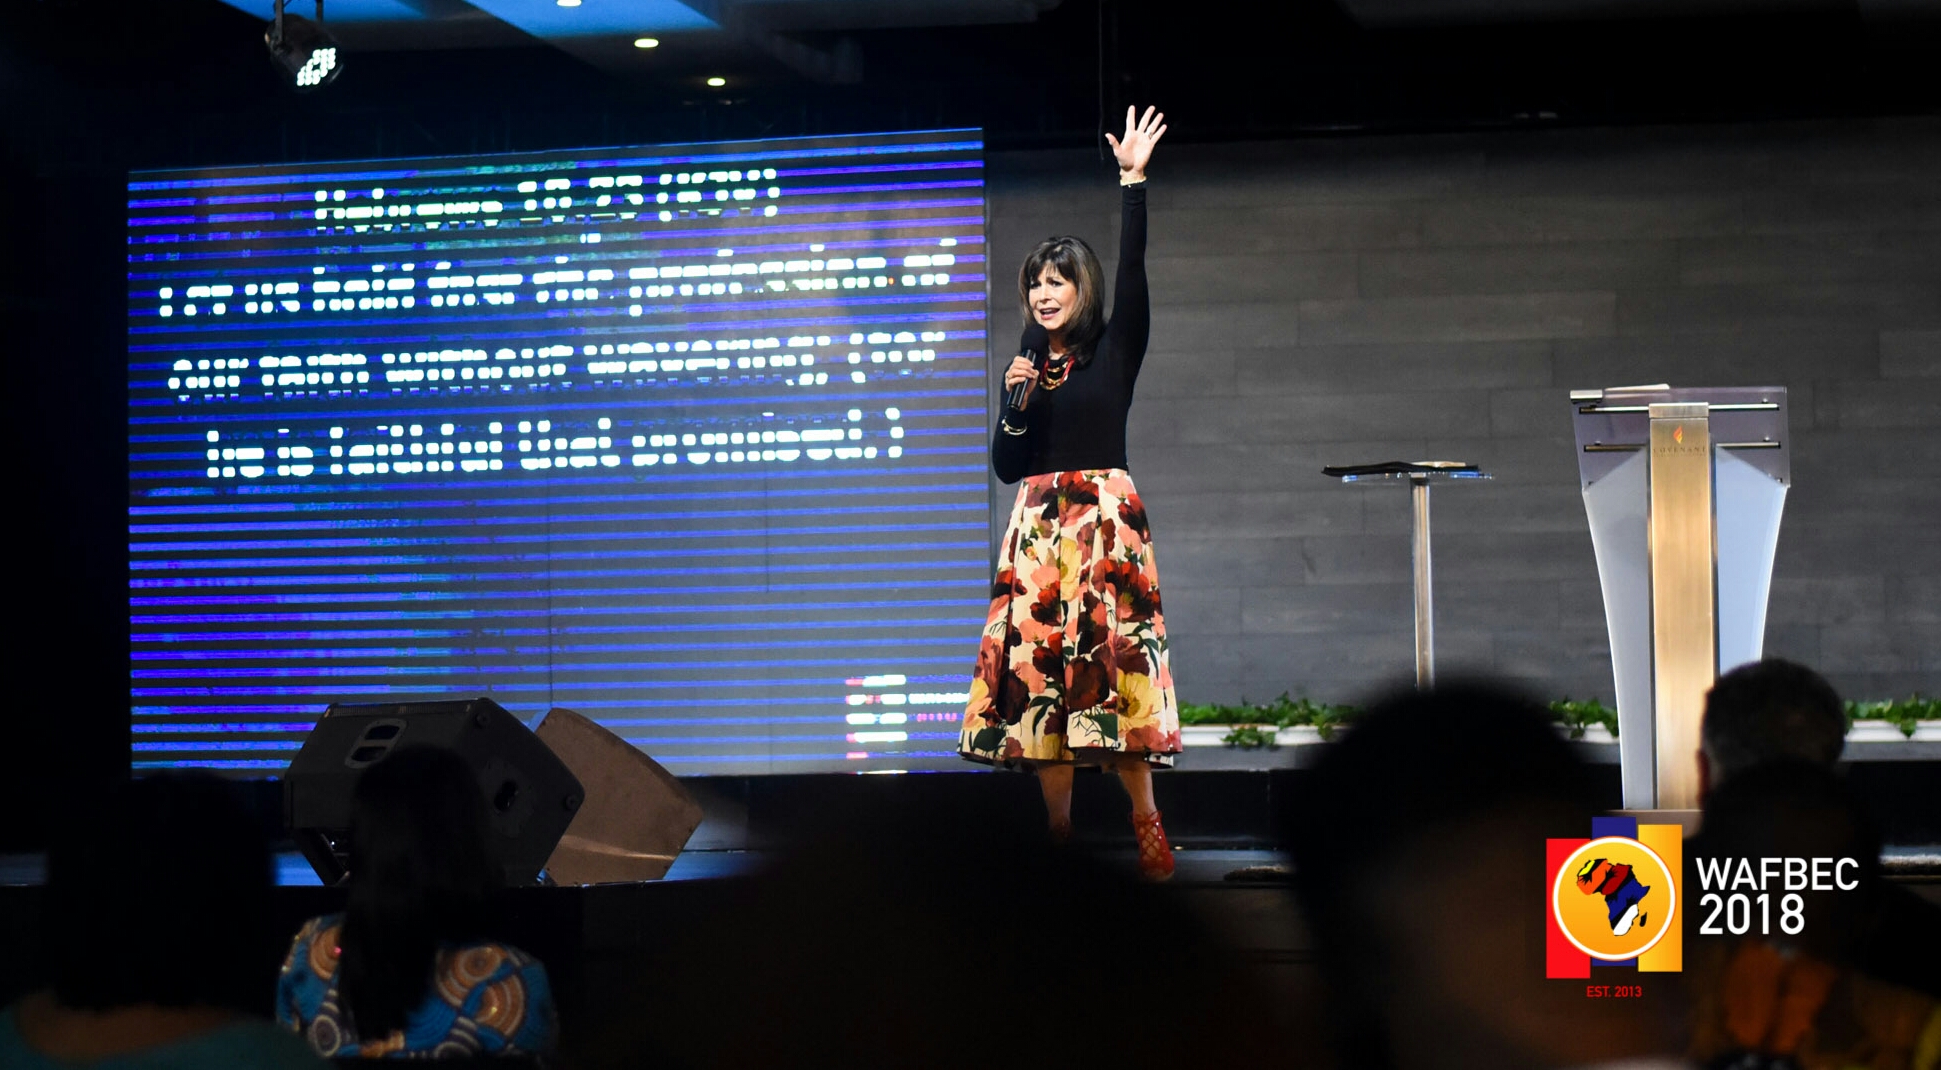 WAFBEC 2018 – Day 3 (Morning Session 2) with Rev. Trina Hankins